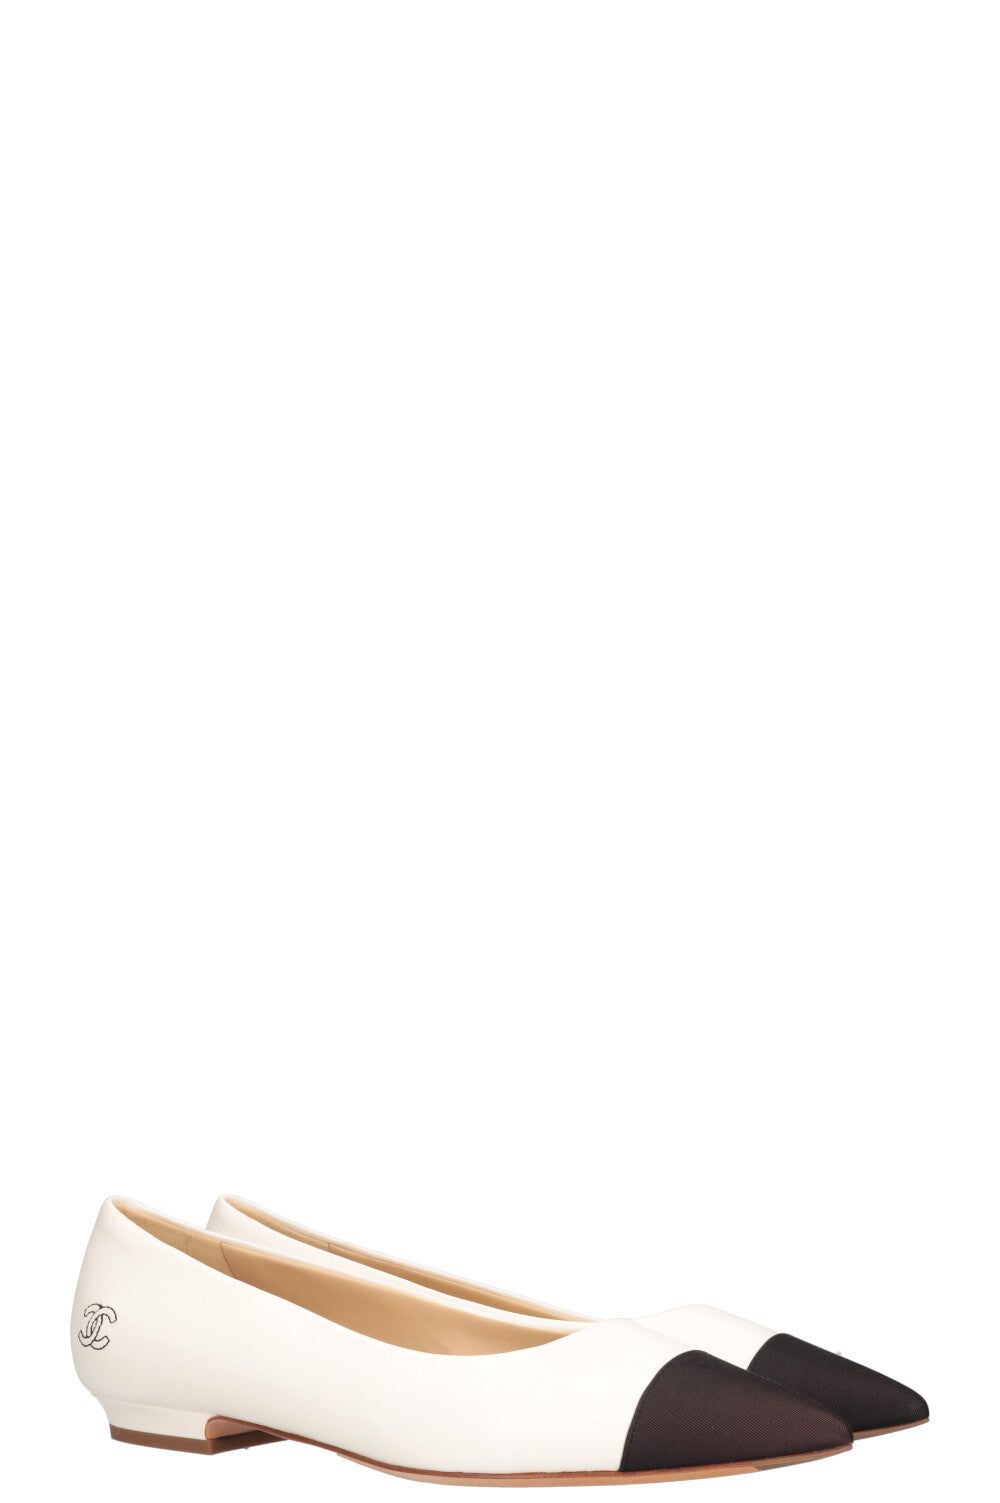 CHANEL Pointy Flats White with Grosgrain Cap Black